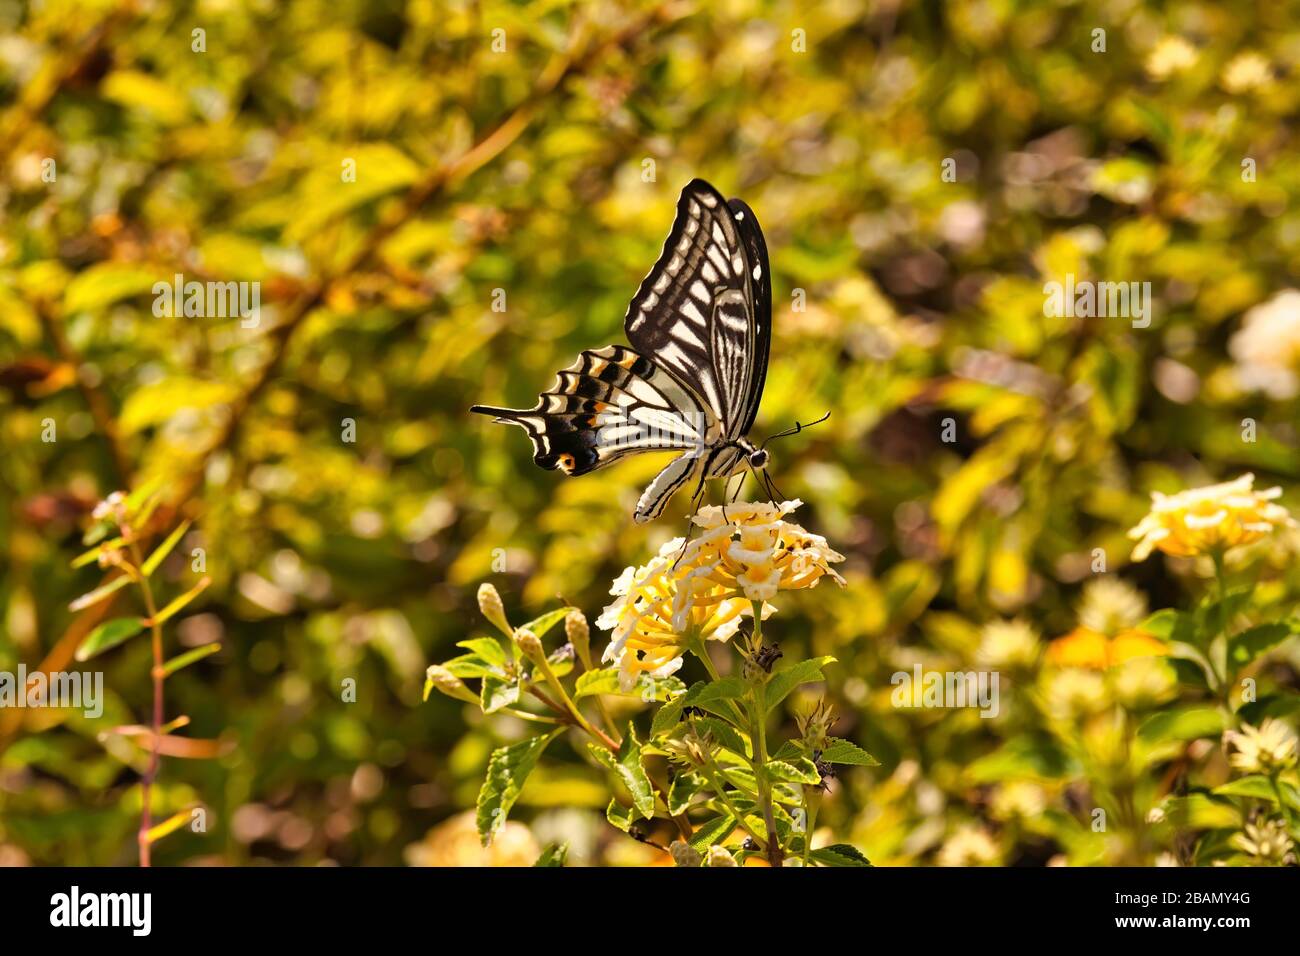 Lone yellow asian swallowtail butterfly resting on a flower. Stock Photo